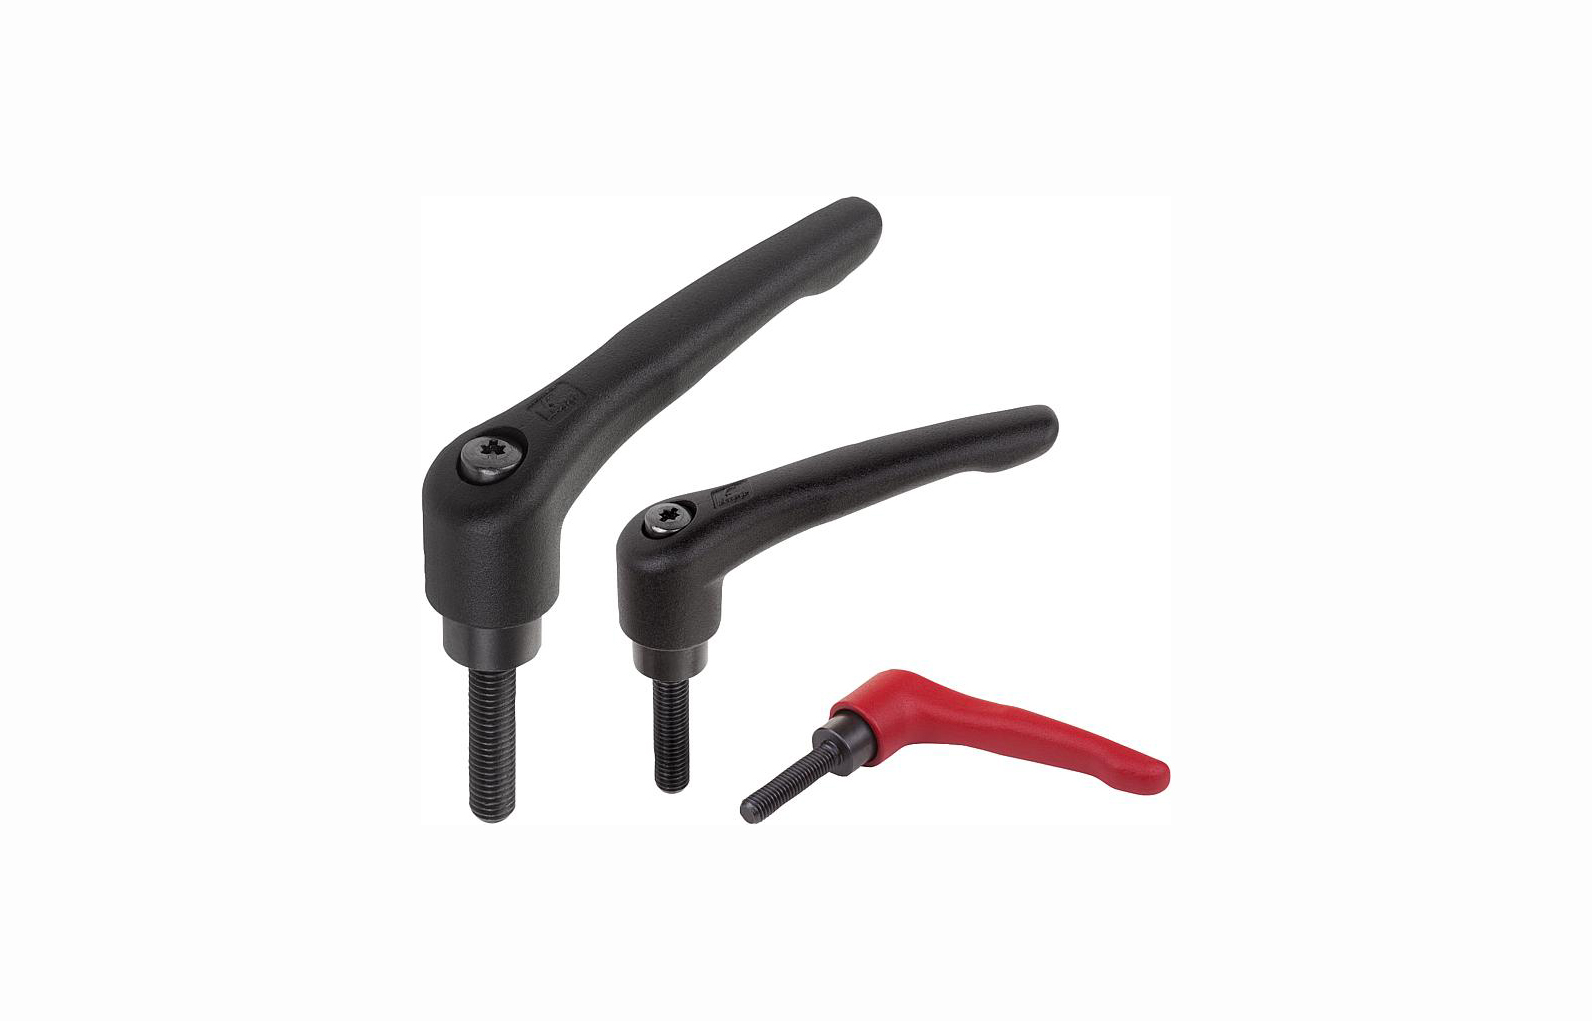 K0752 Clamping levers with external thread, steel